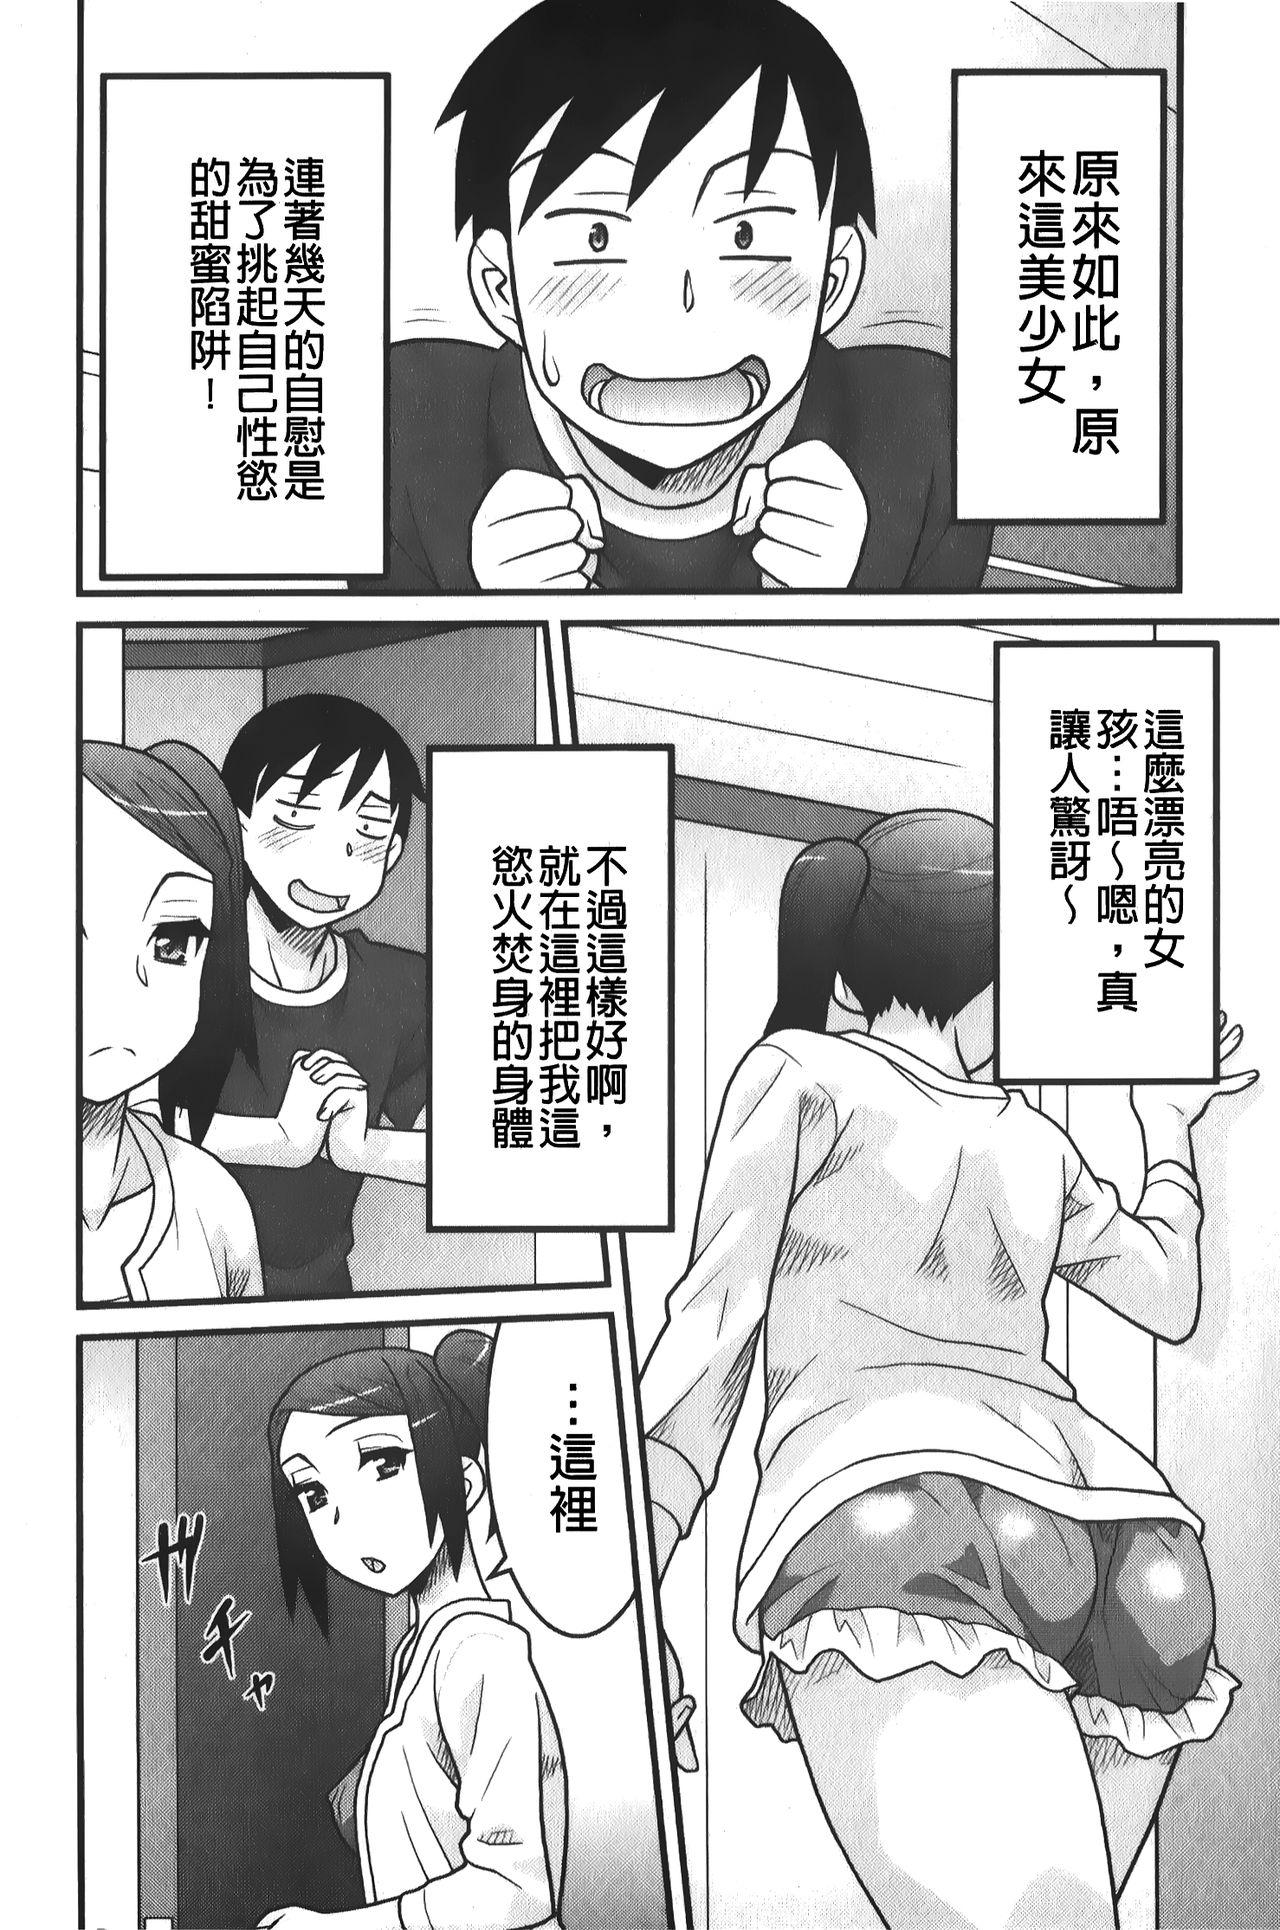 Shaved Pussy zannen garus | 殘念怪女孩們 Alone - Page 9